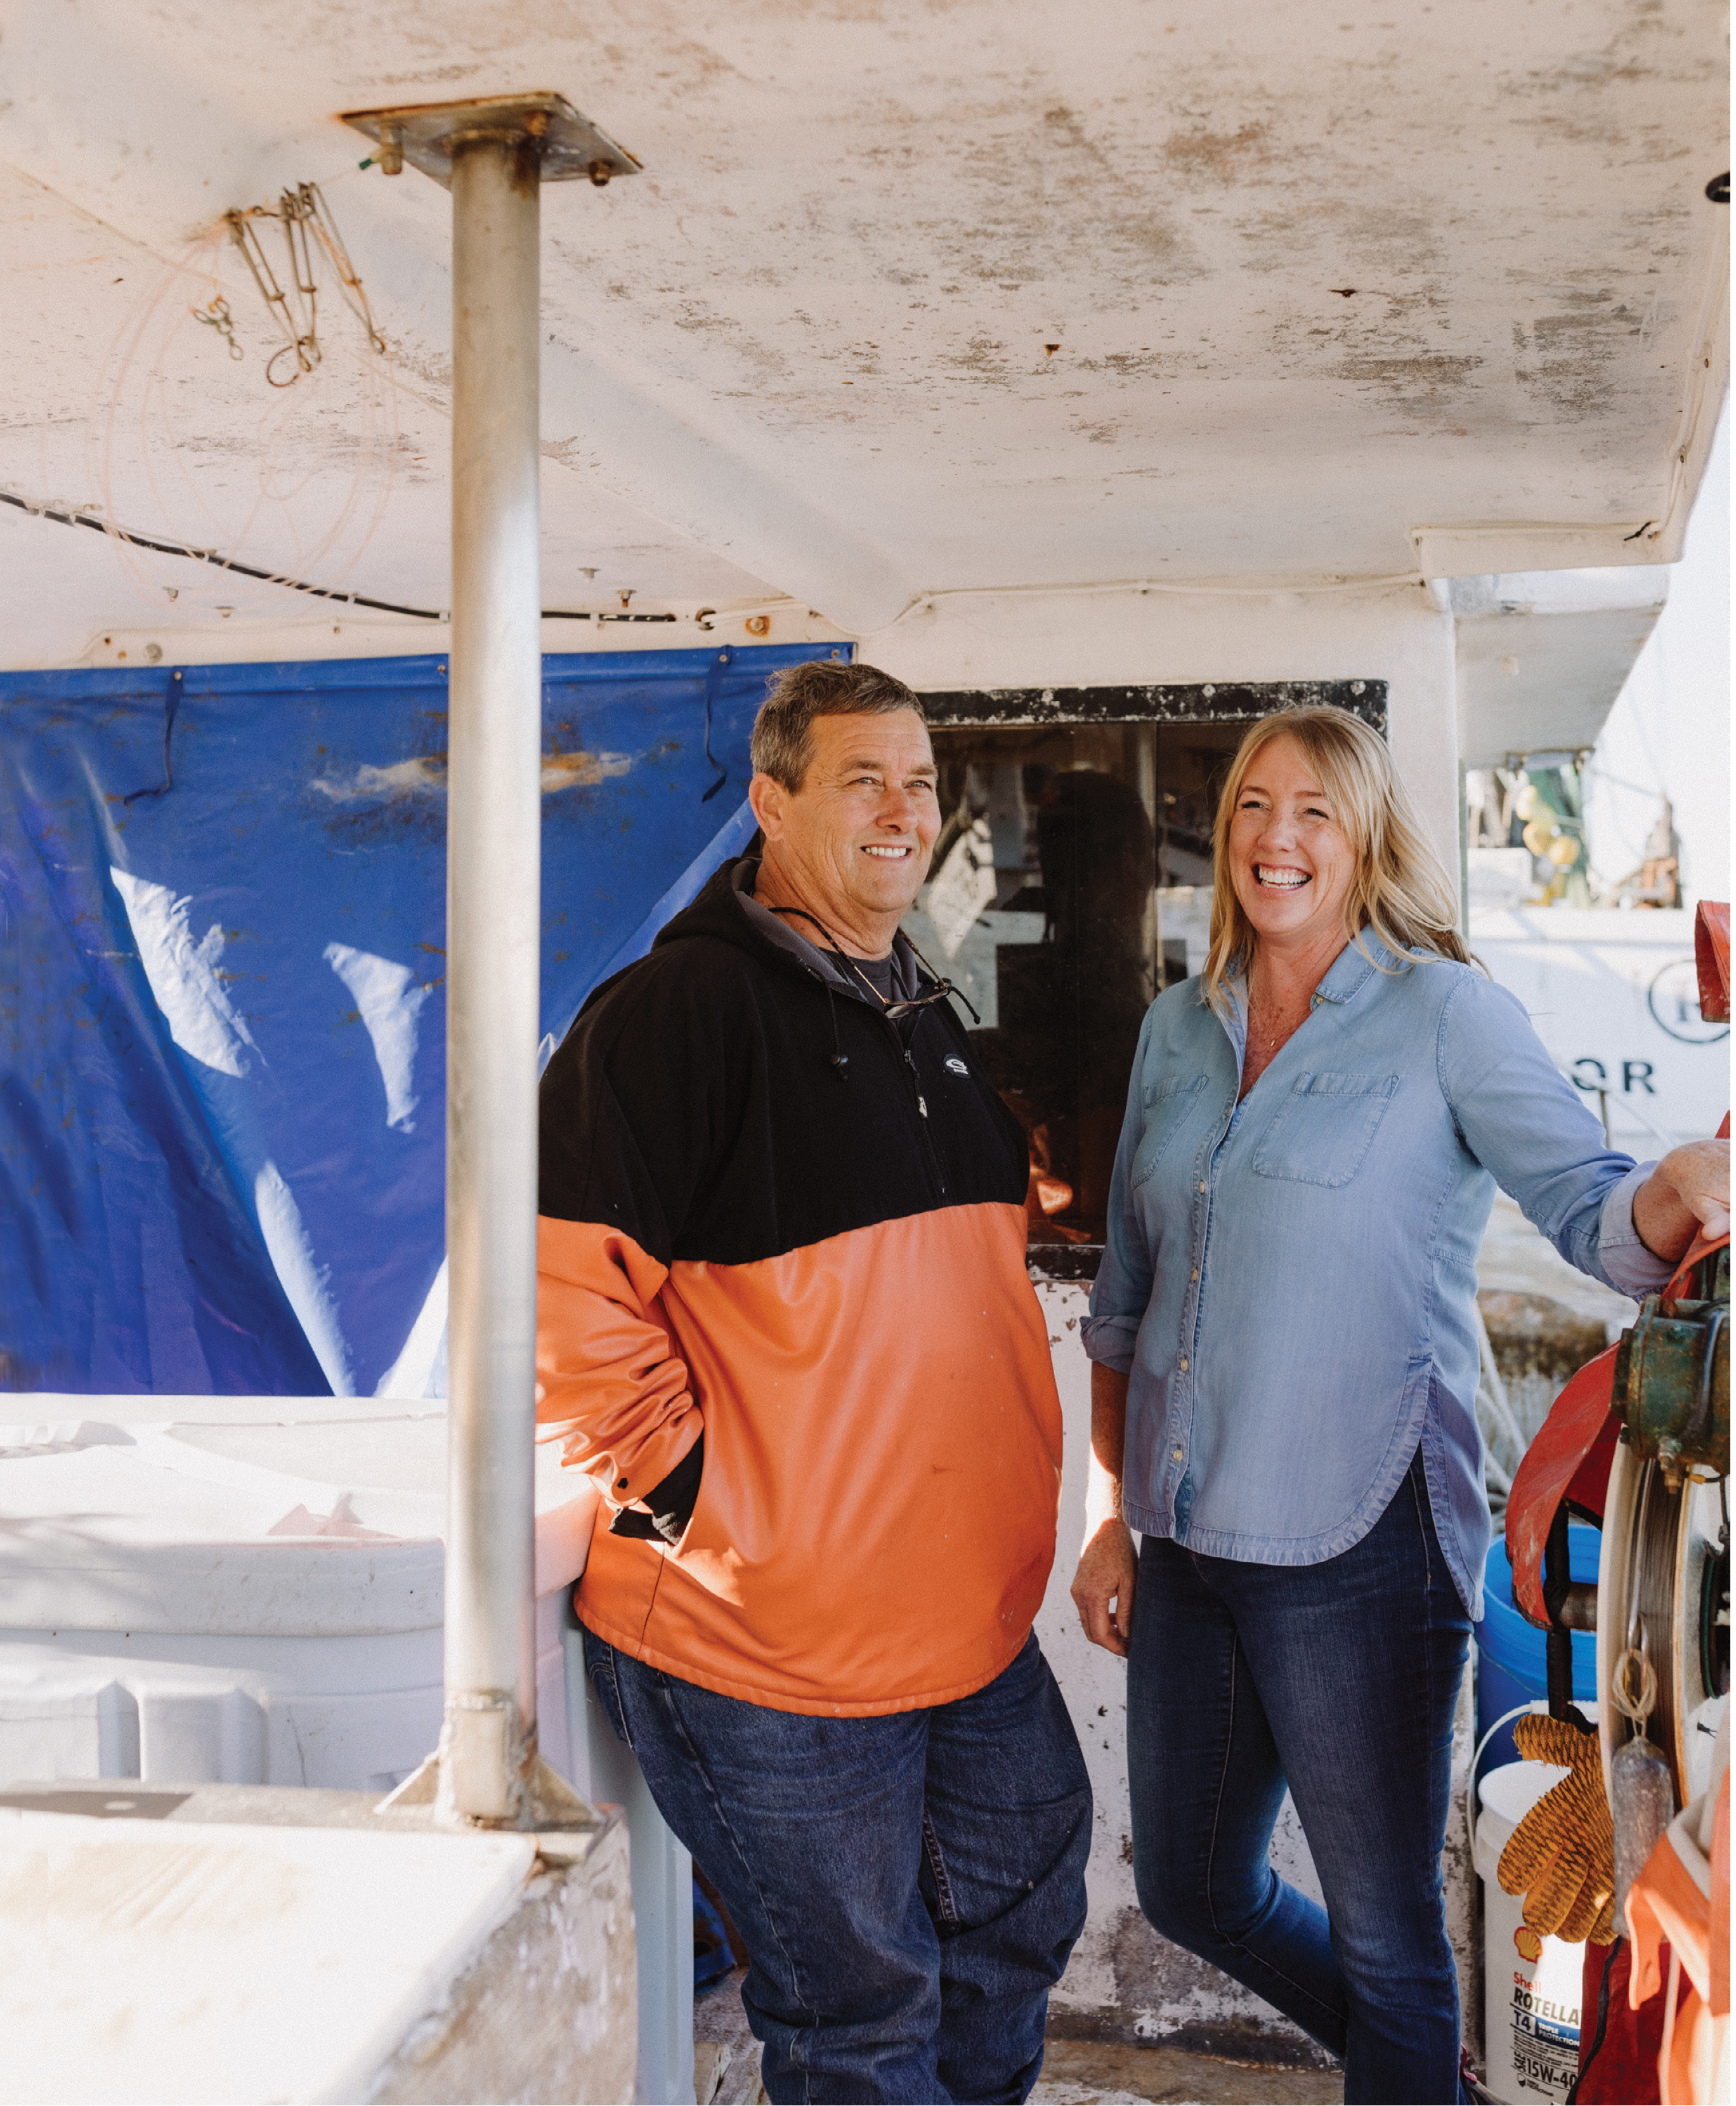 Mark and Kerry at Geechie Dock, where they launched Abundant Seafood’s Community Supported Fishery in 2010. Mark was among the first wave of fishermen to create a seafood membership plan that allows individuals to pay for quarterly allotments of fish, available for pickup twice each month.